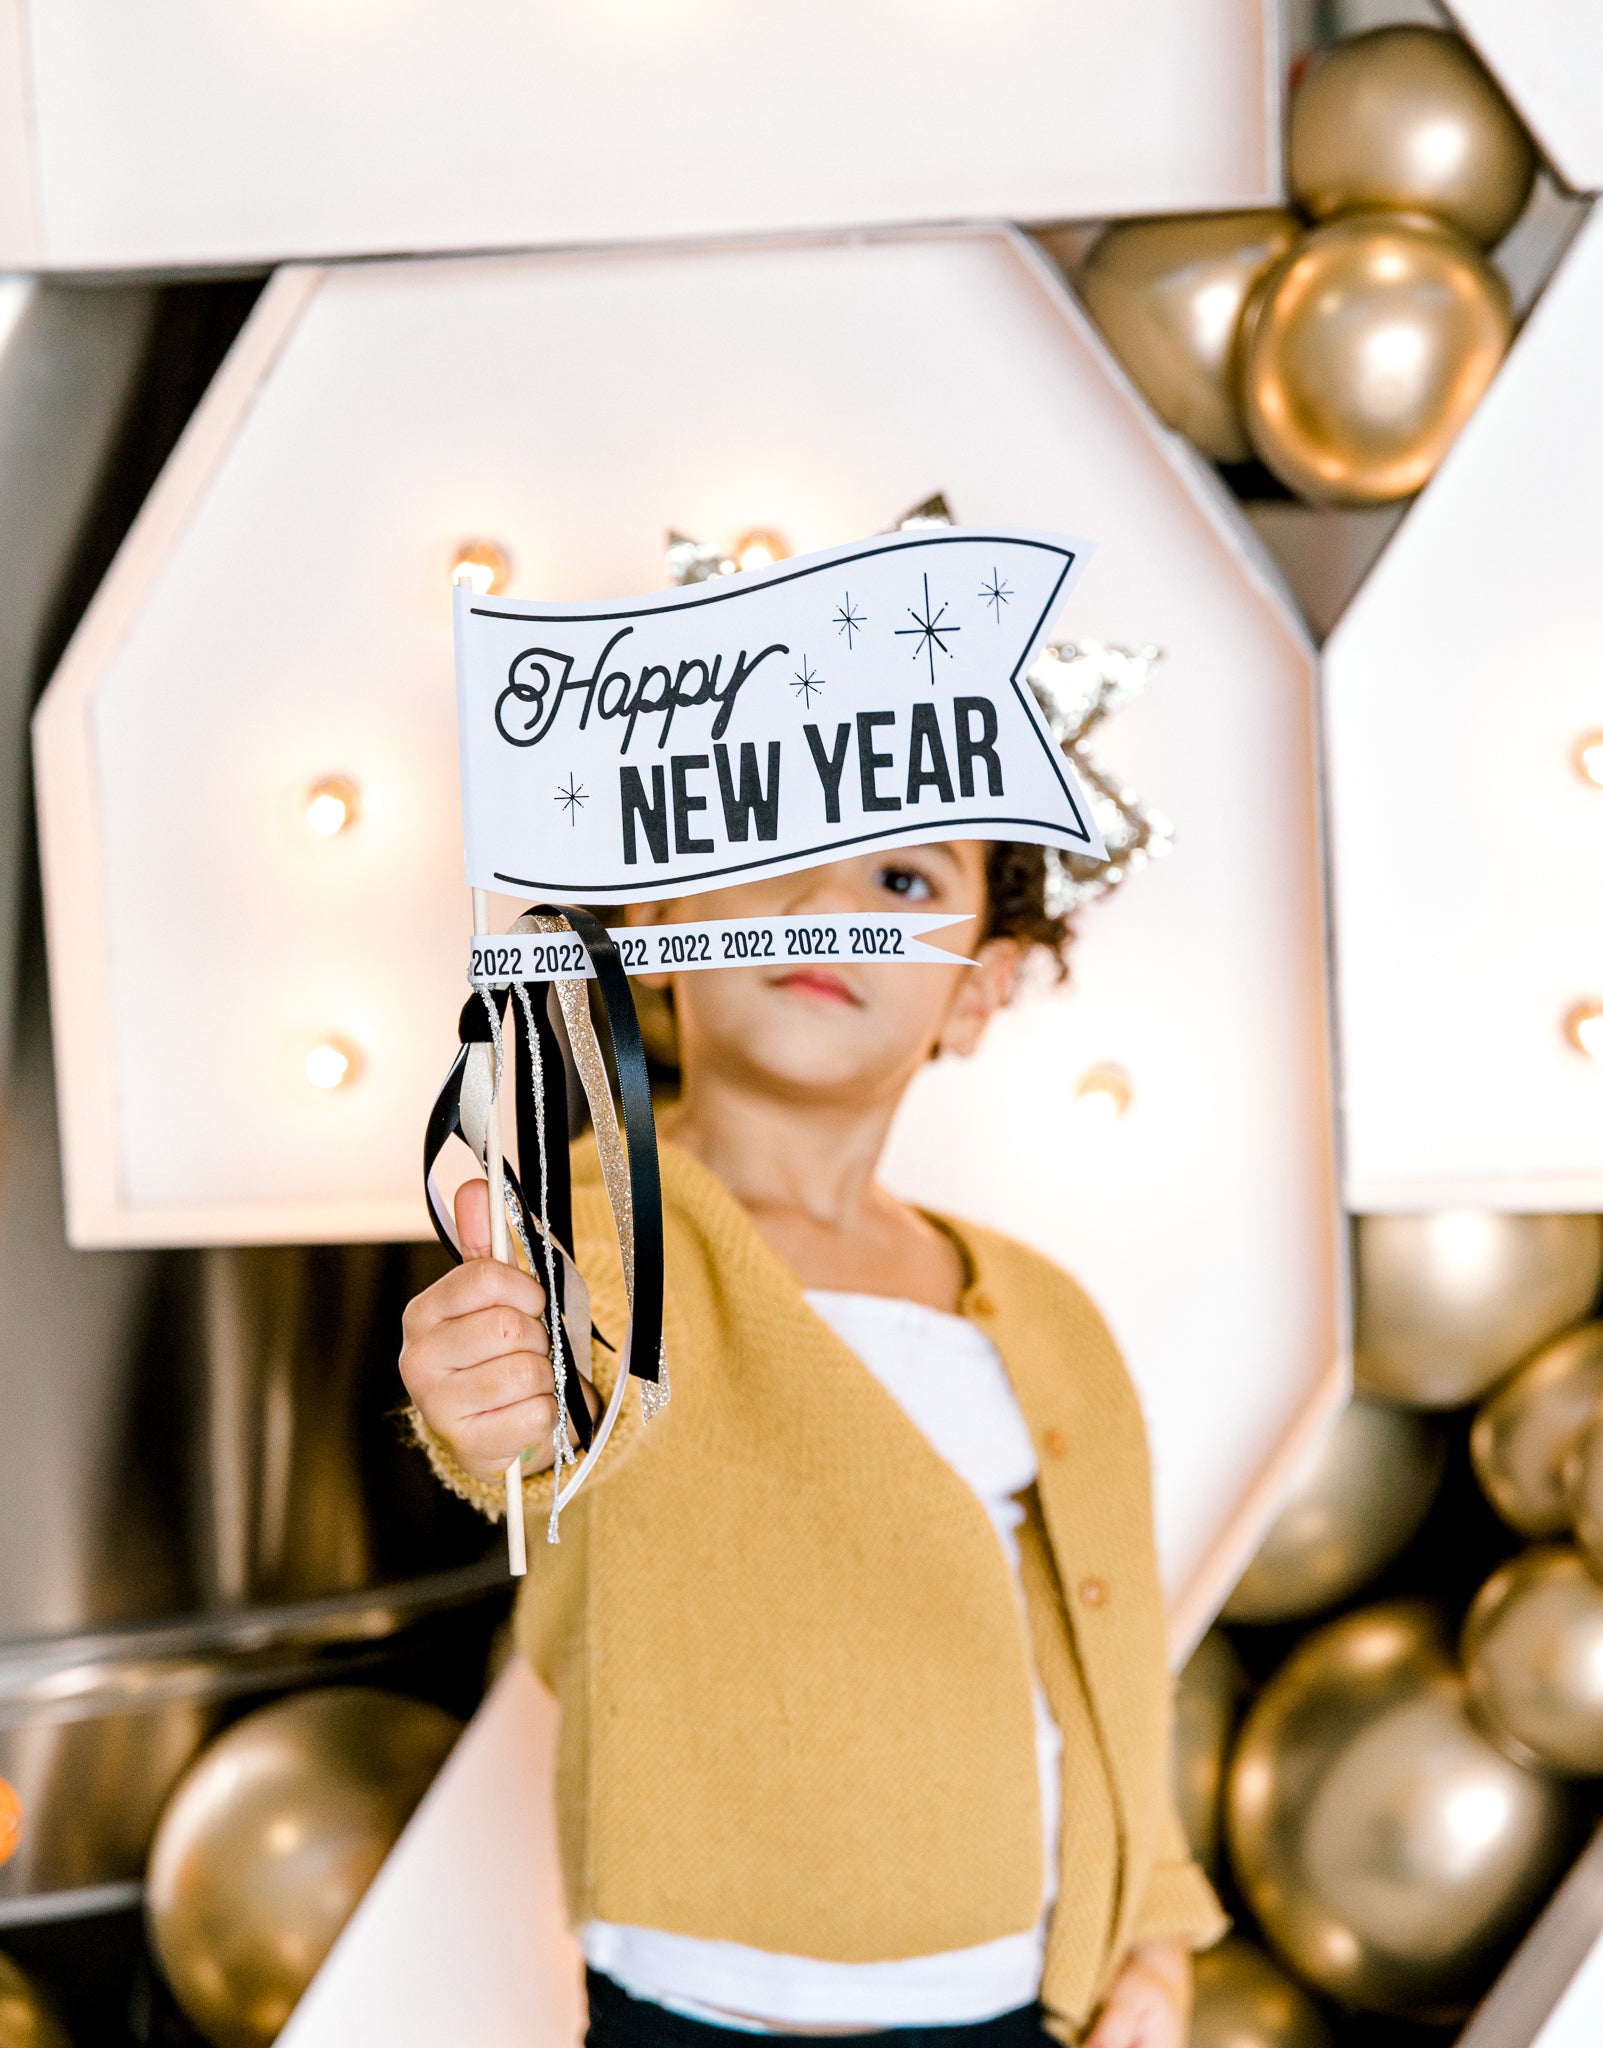 DISCO THEMED NEW YEAR'S EVE PARTY IDEAS – Bonjour Fête